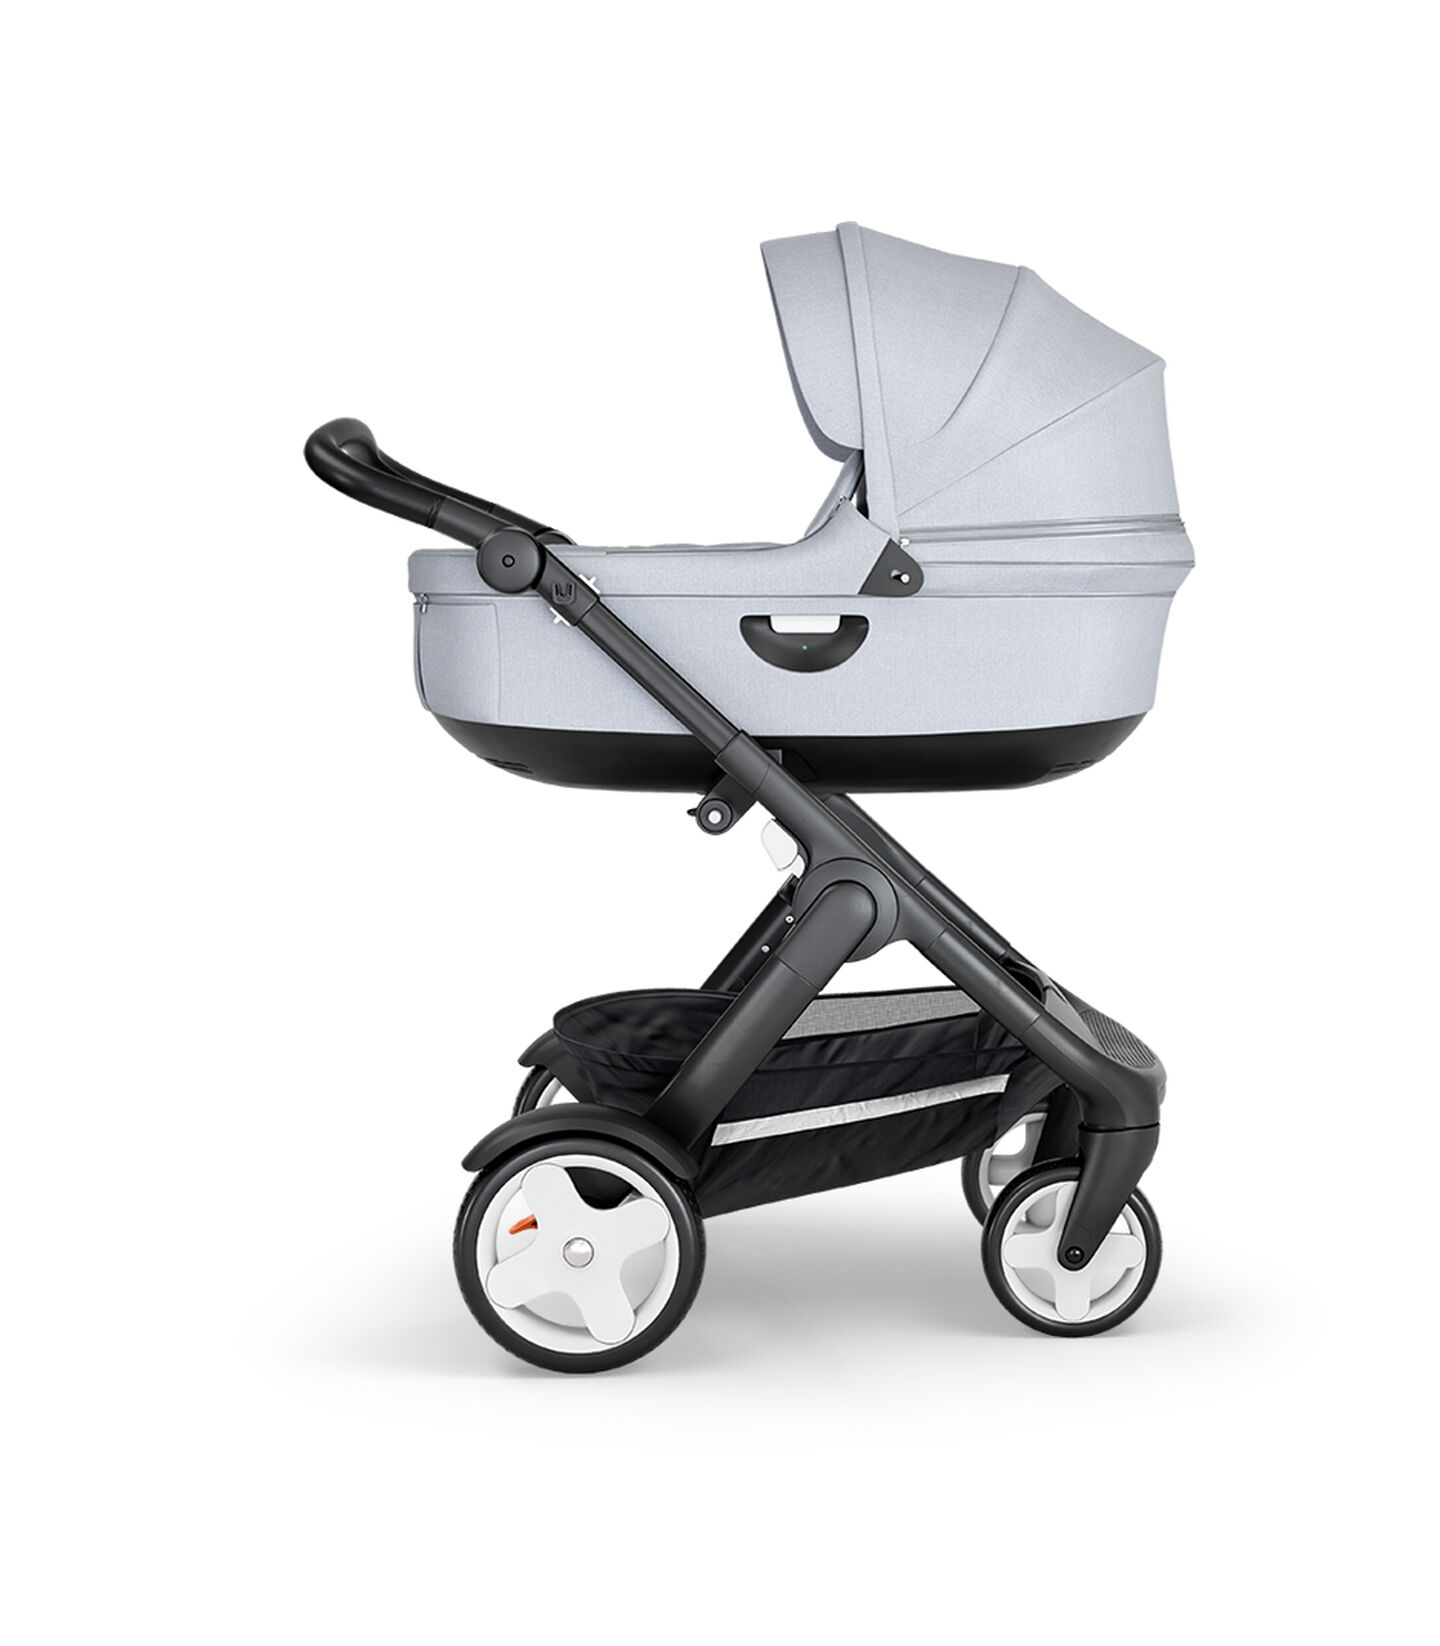 Stokke® Trailz™ with Black Chassis, Black Leatherette and Classic Wheels. Stokke® Stroller Carry Cot, Grey Melange. view 2